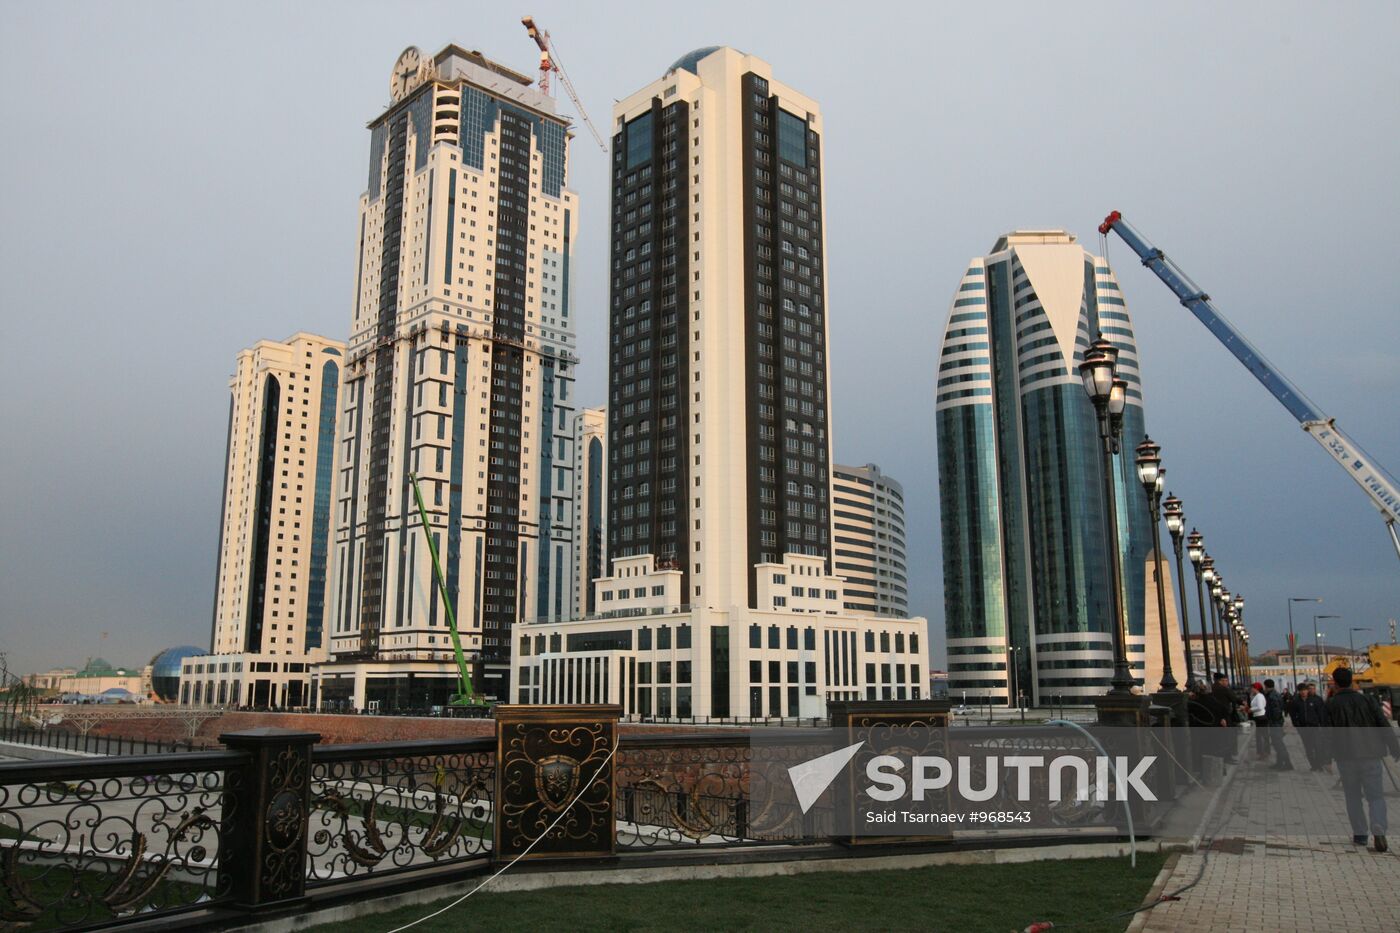 Preparations for City Day in Grozny